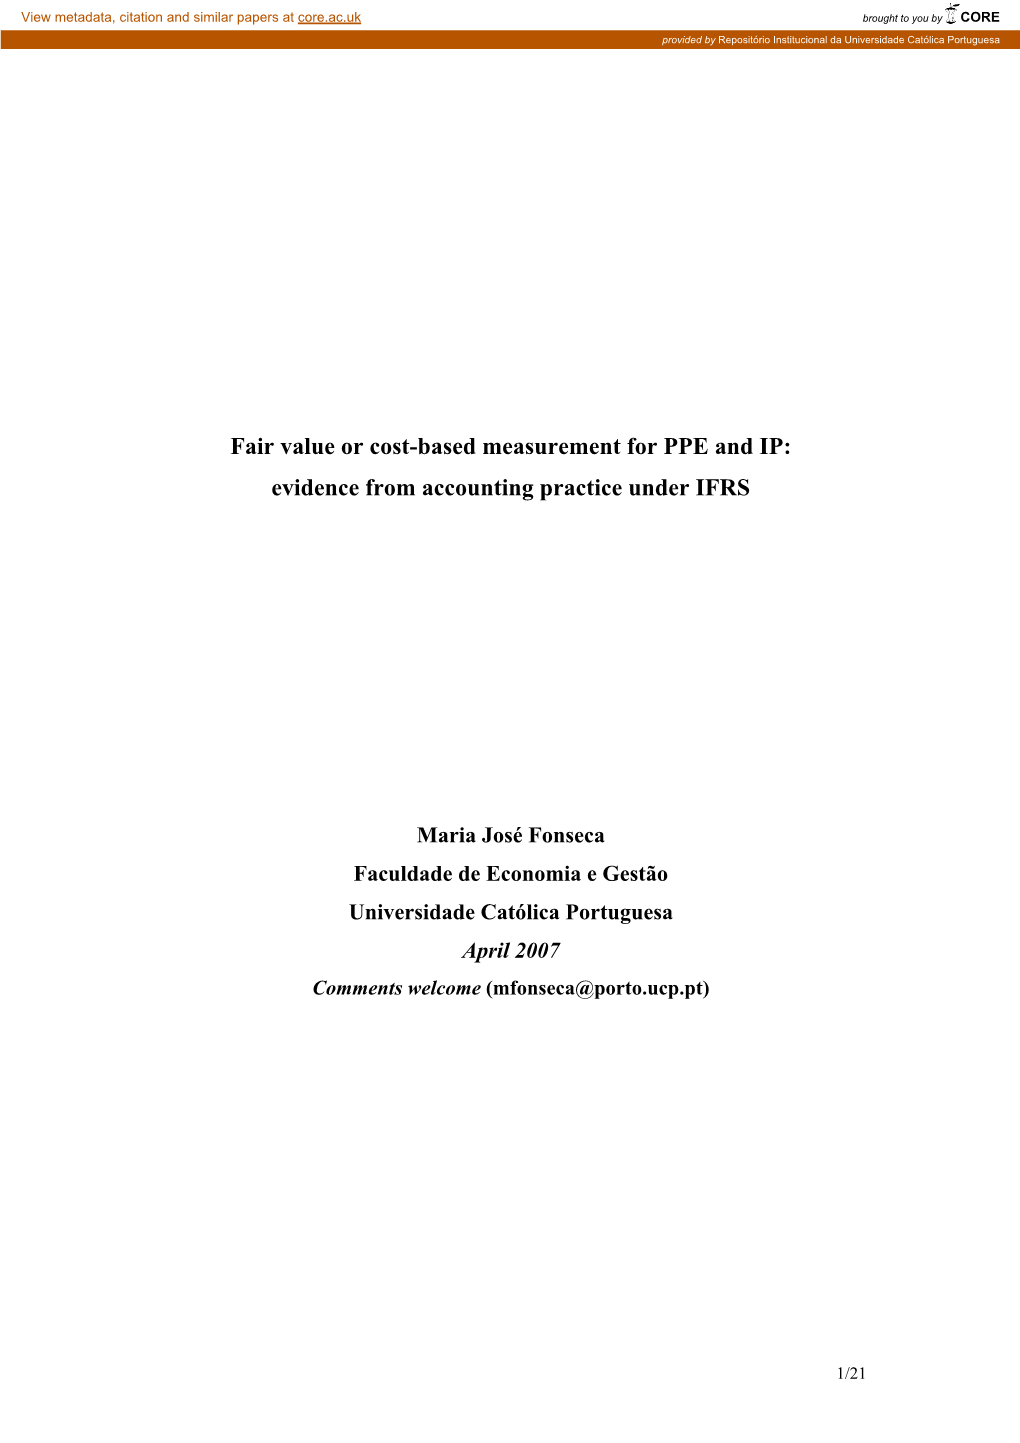 Fair Value Or Cost-Based Measurement for PPE and IP: Evidence from Accounting Practice Under IFRS